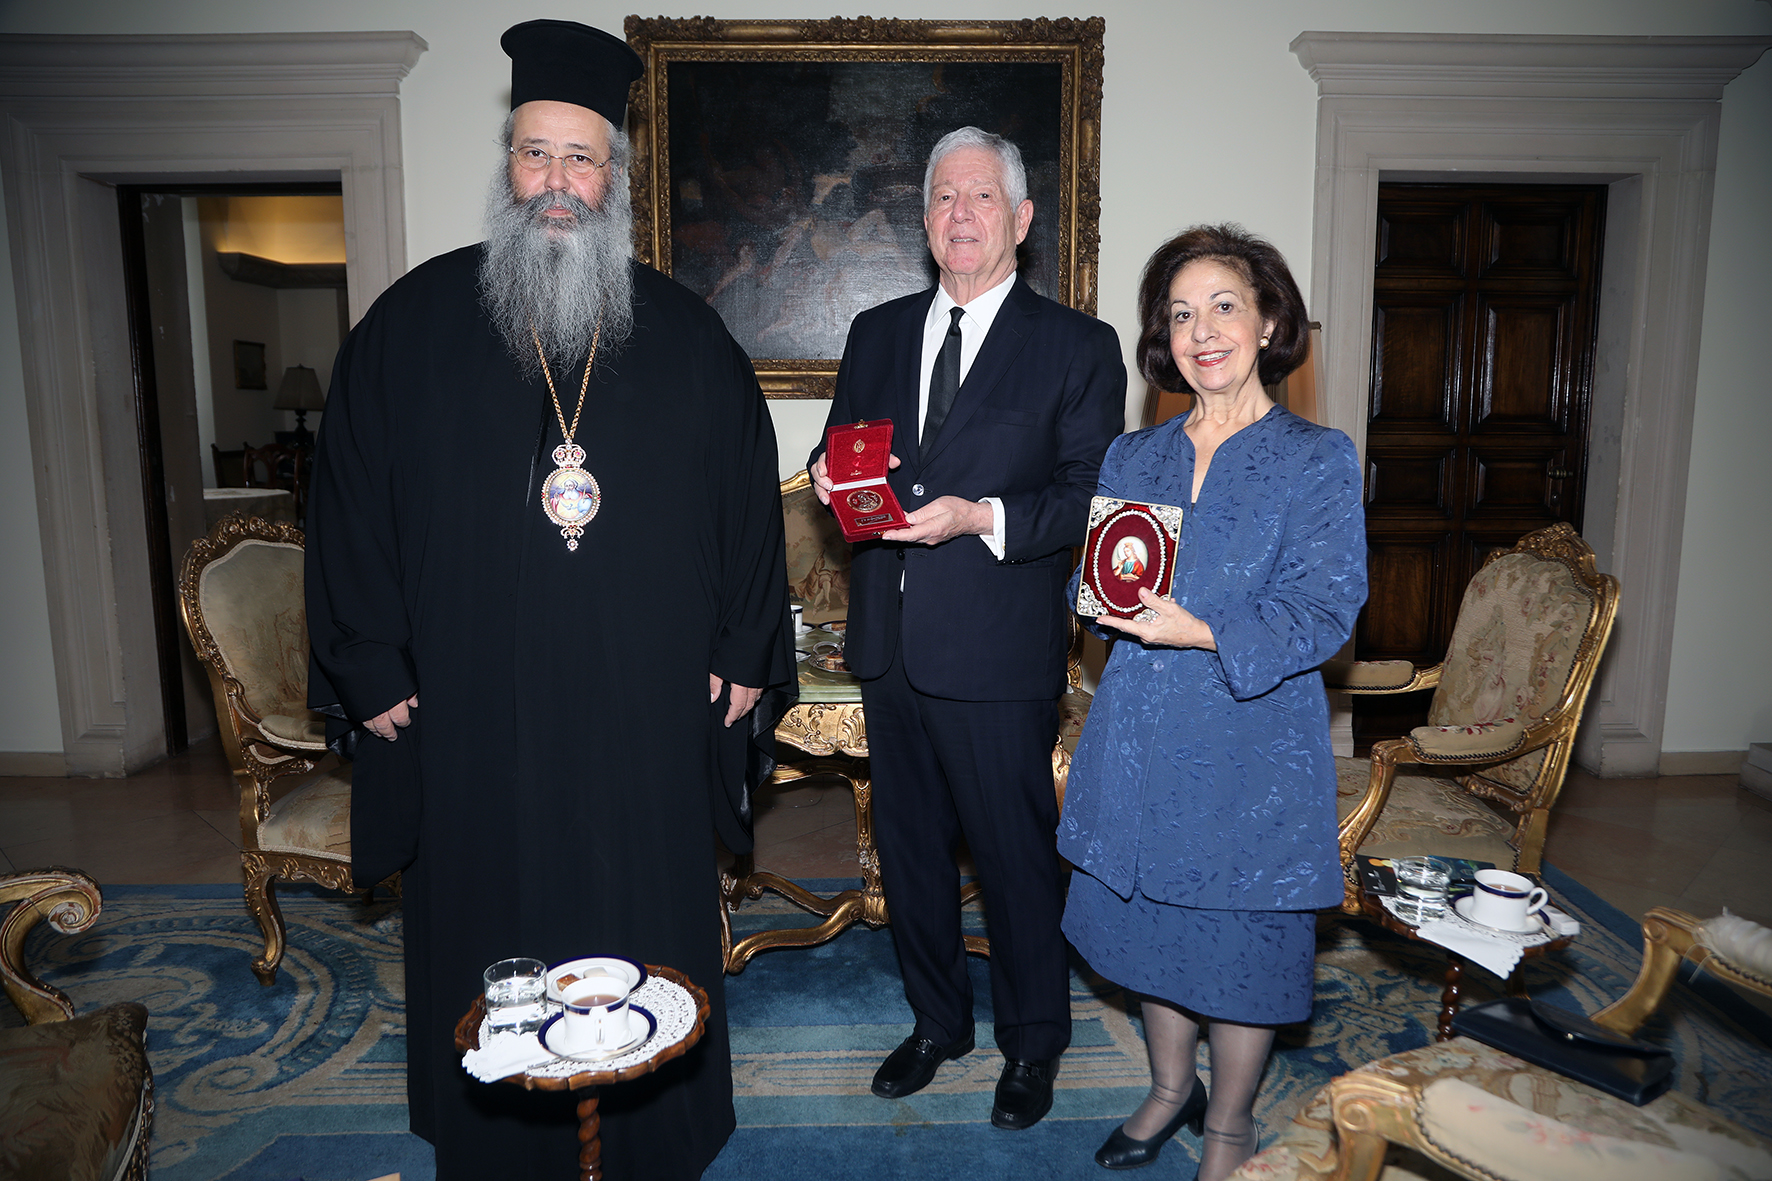 ROYAL COUPLE OF SERBIA WELCOME METROPOLITAN GEORGIOS IN THE ROYAL PALACE